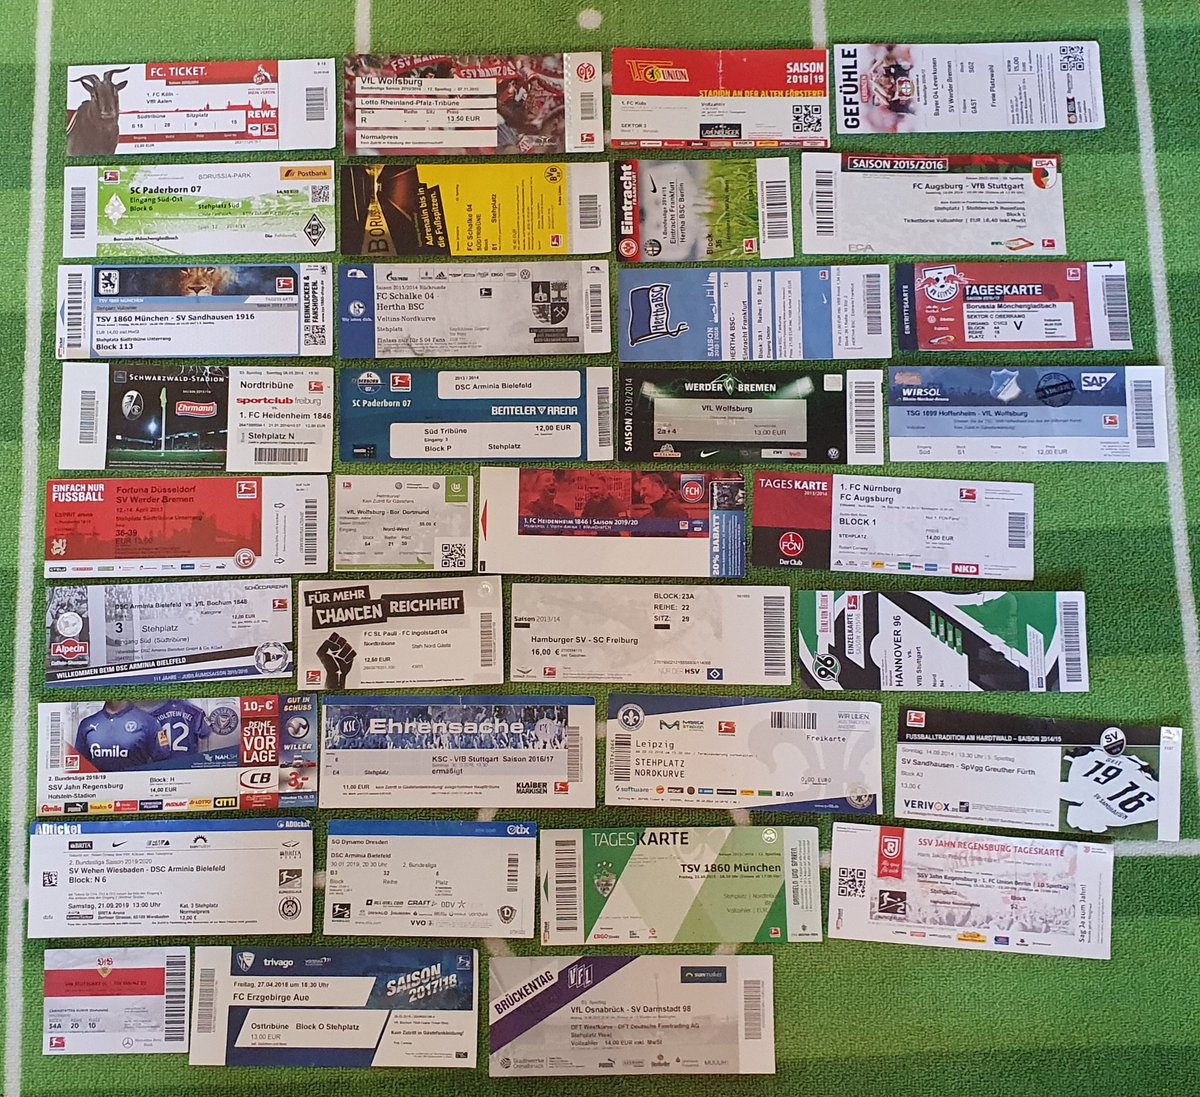 On the day I should've been at Aue completing the Bundesliga 1&2, tickets from the other 35 grounds visited plus tickets from 3 liga grounds I've visited & my Alemannia Aachen matches. 